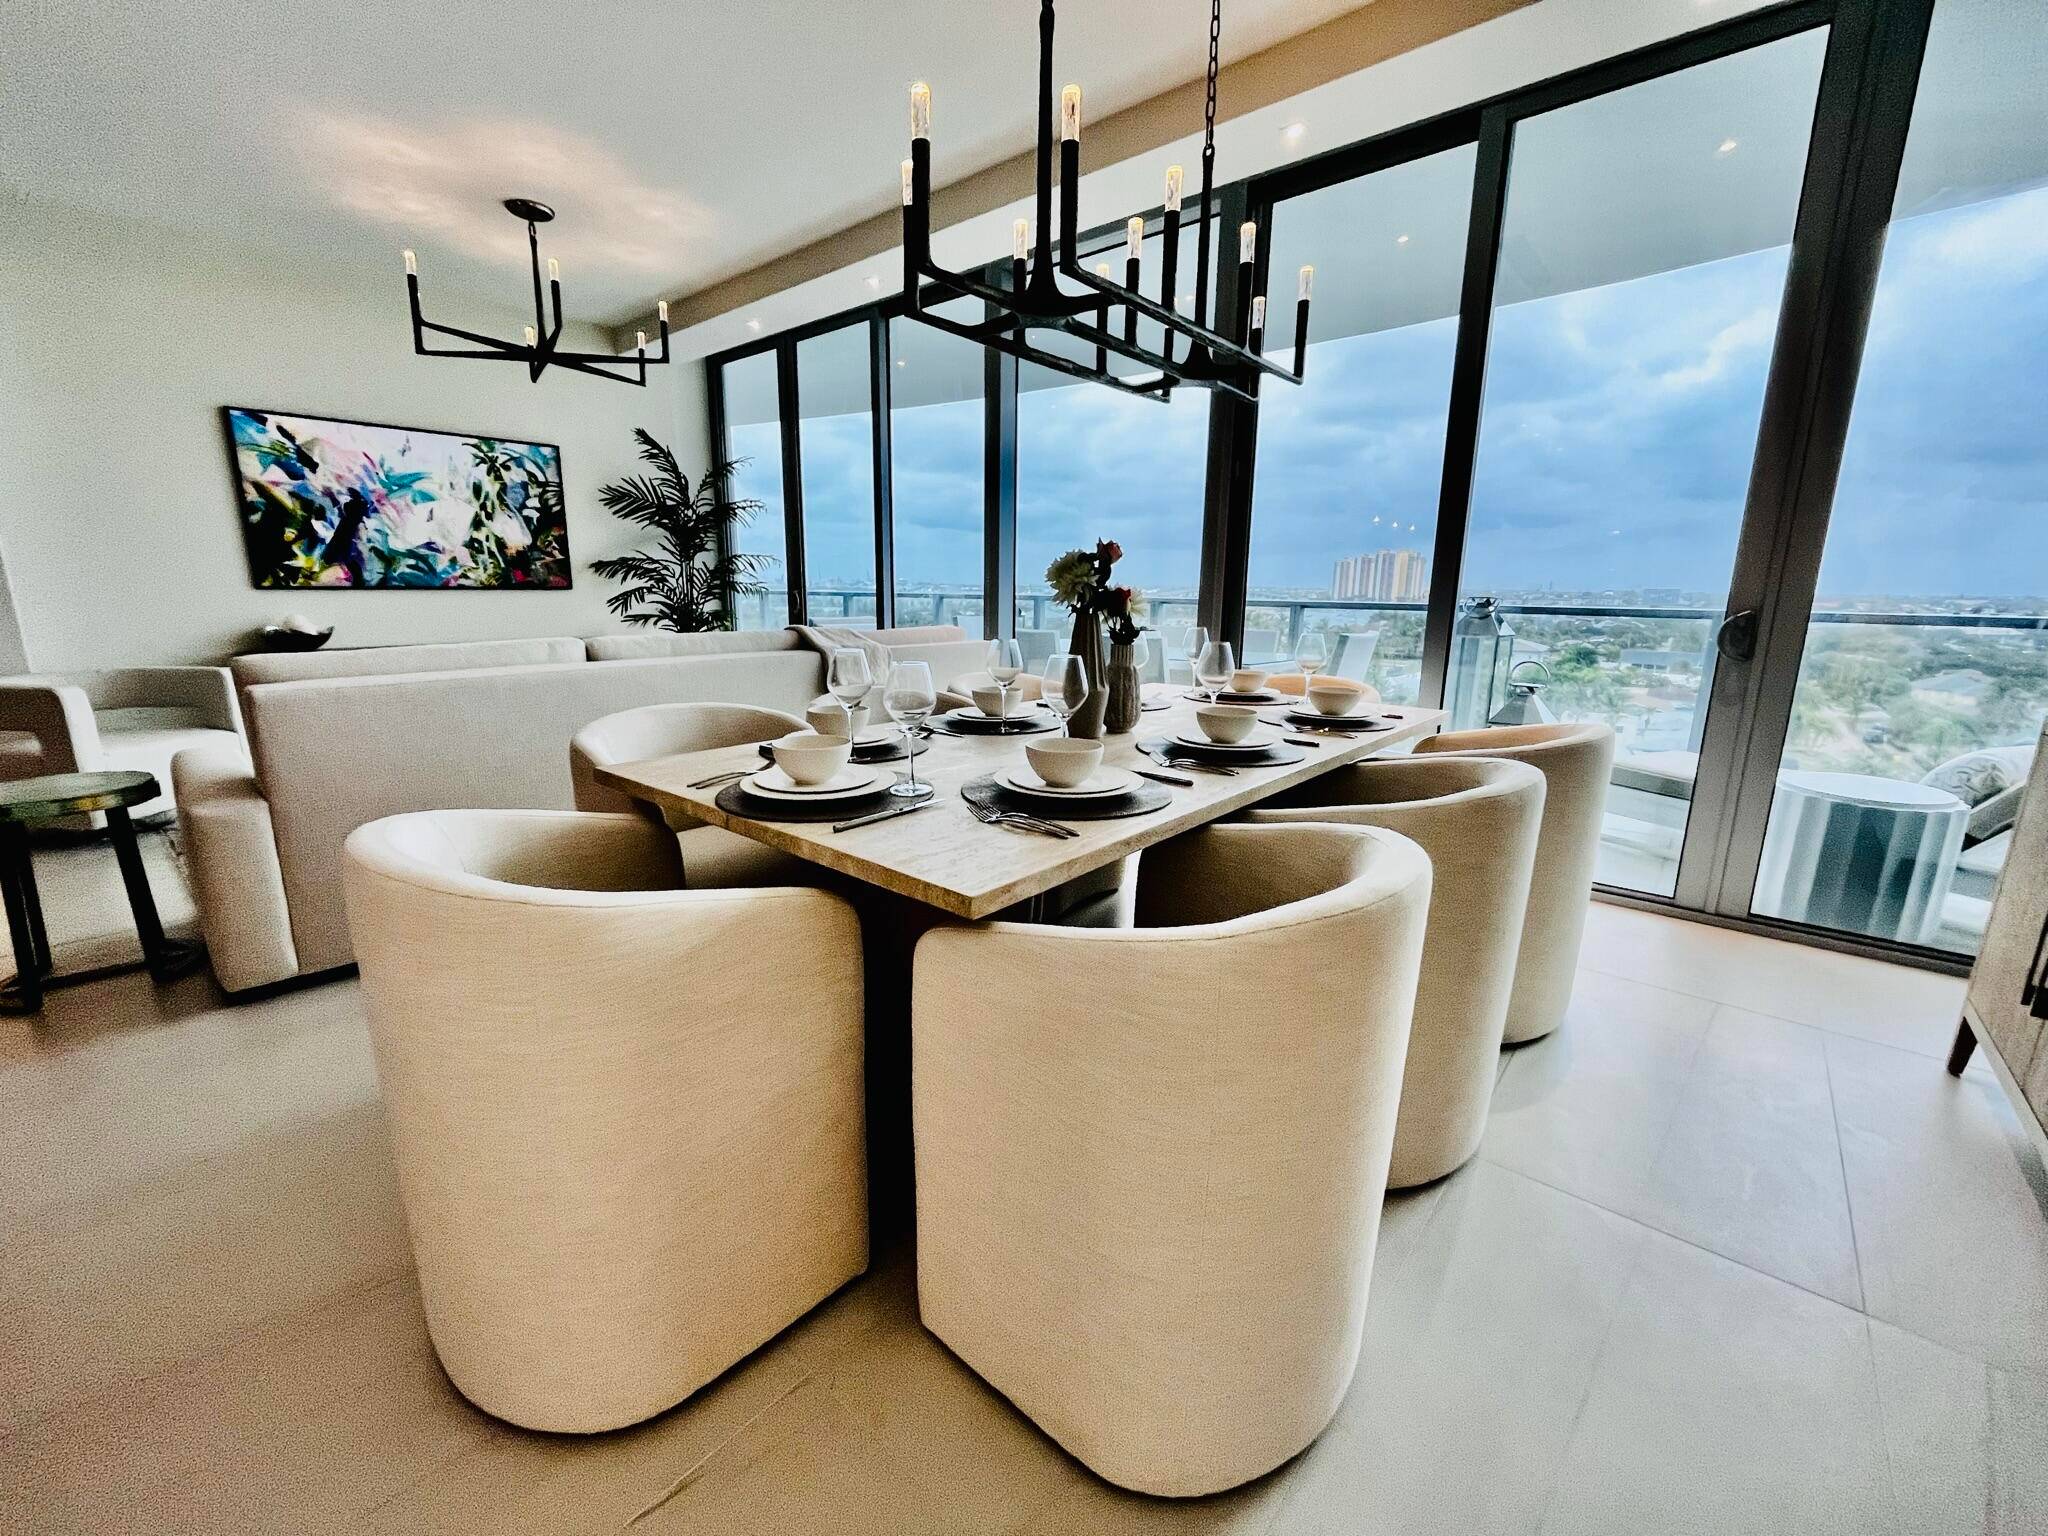 Beautiful, wonderfully furnished Restoration Hardware 2 bed 2 bath condo with spectacular intracoastal views from every room at the Amrit Ocean available with flexible lease terms.